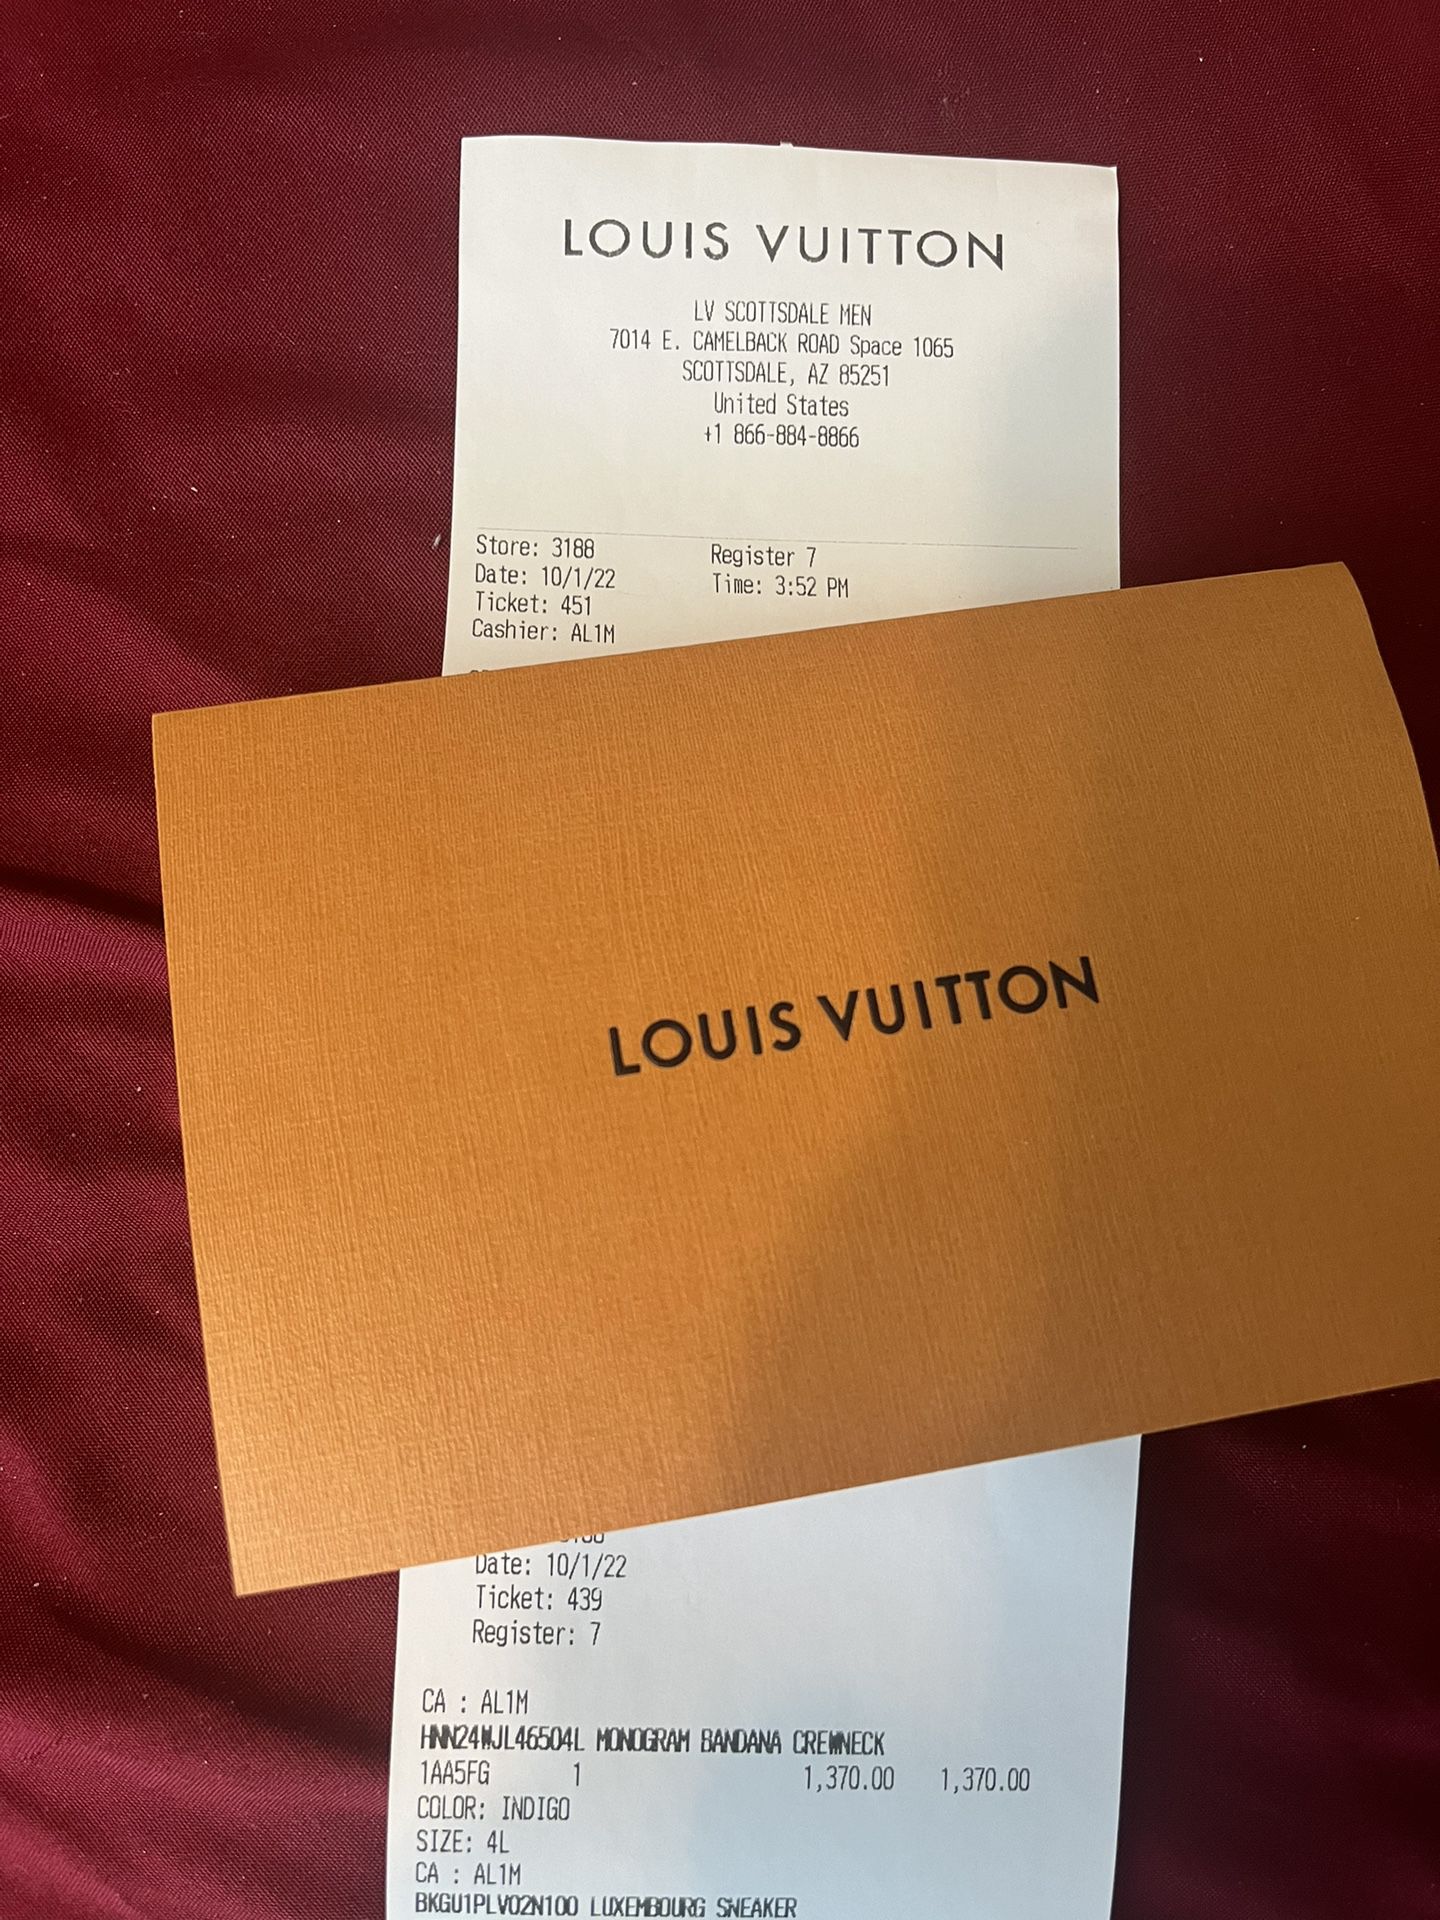 Louis Vuitton tutu outfit. for Sale in Gresham, OR - OfferUp